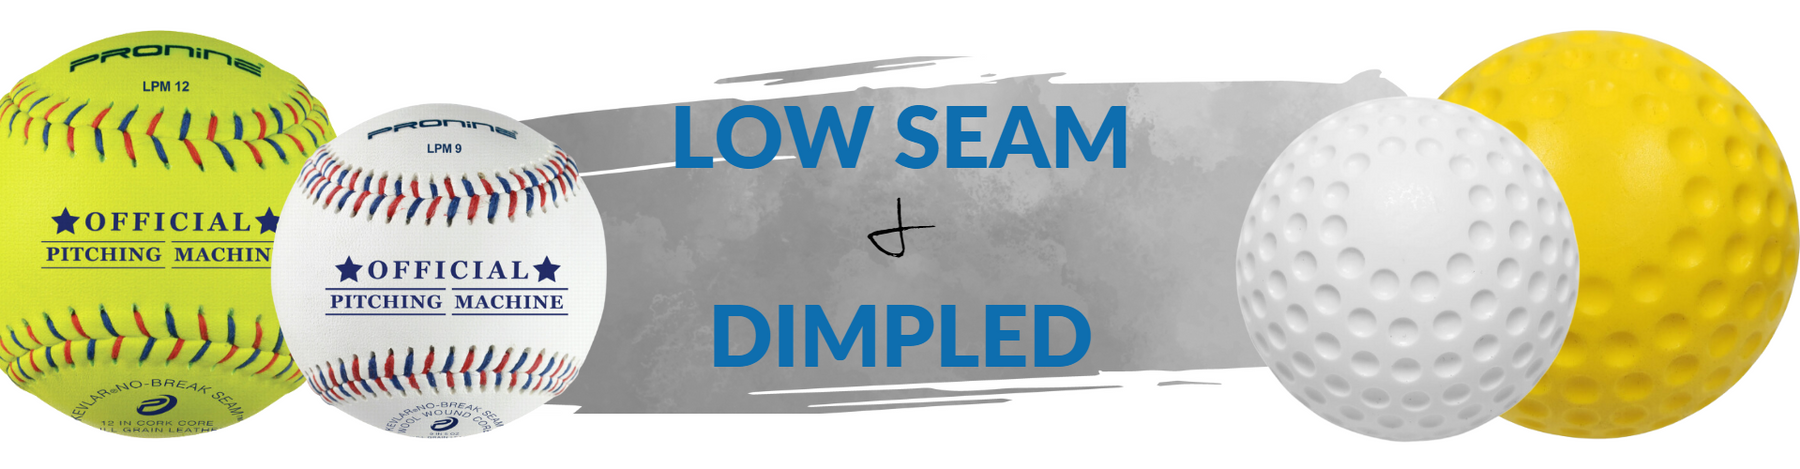 Why We Recommend Low Seam or Dimpled Baseballs For Your Pitching Machine